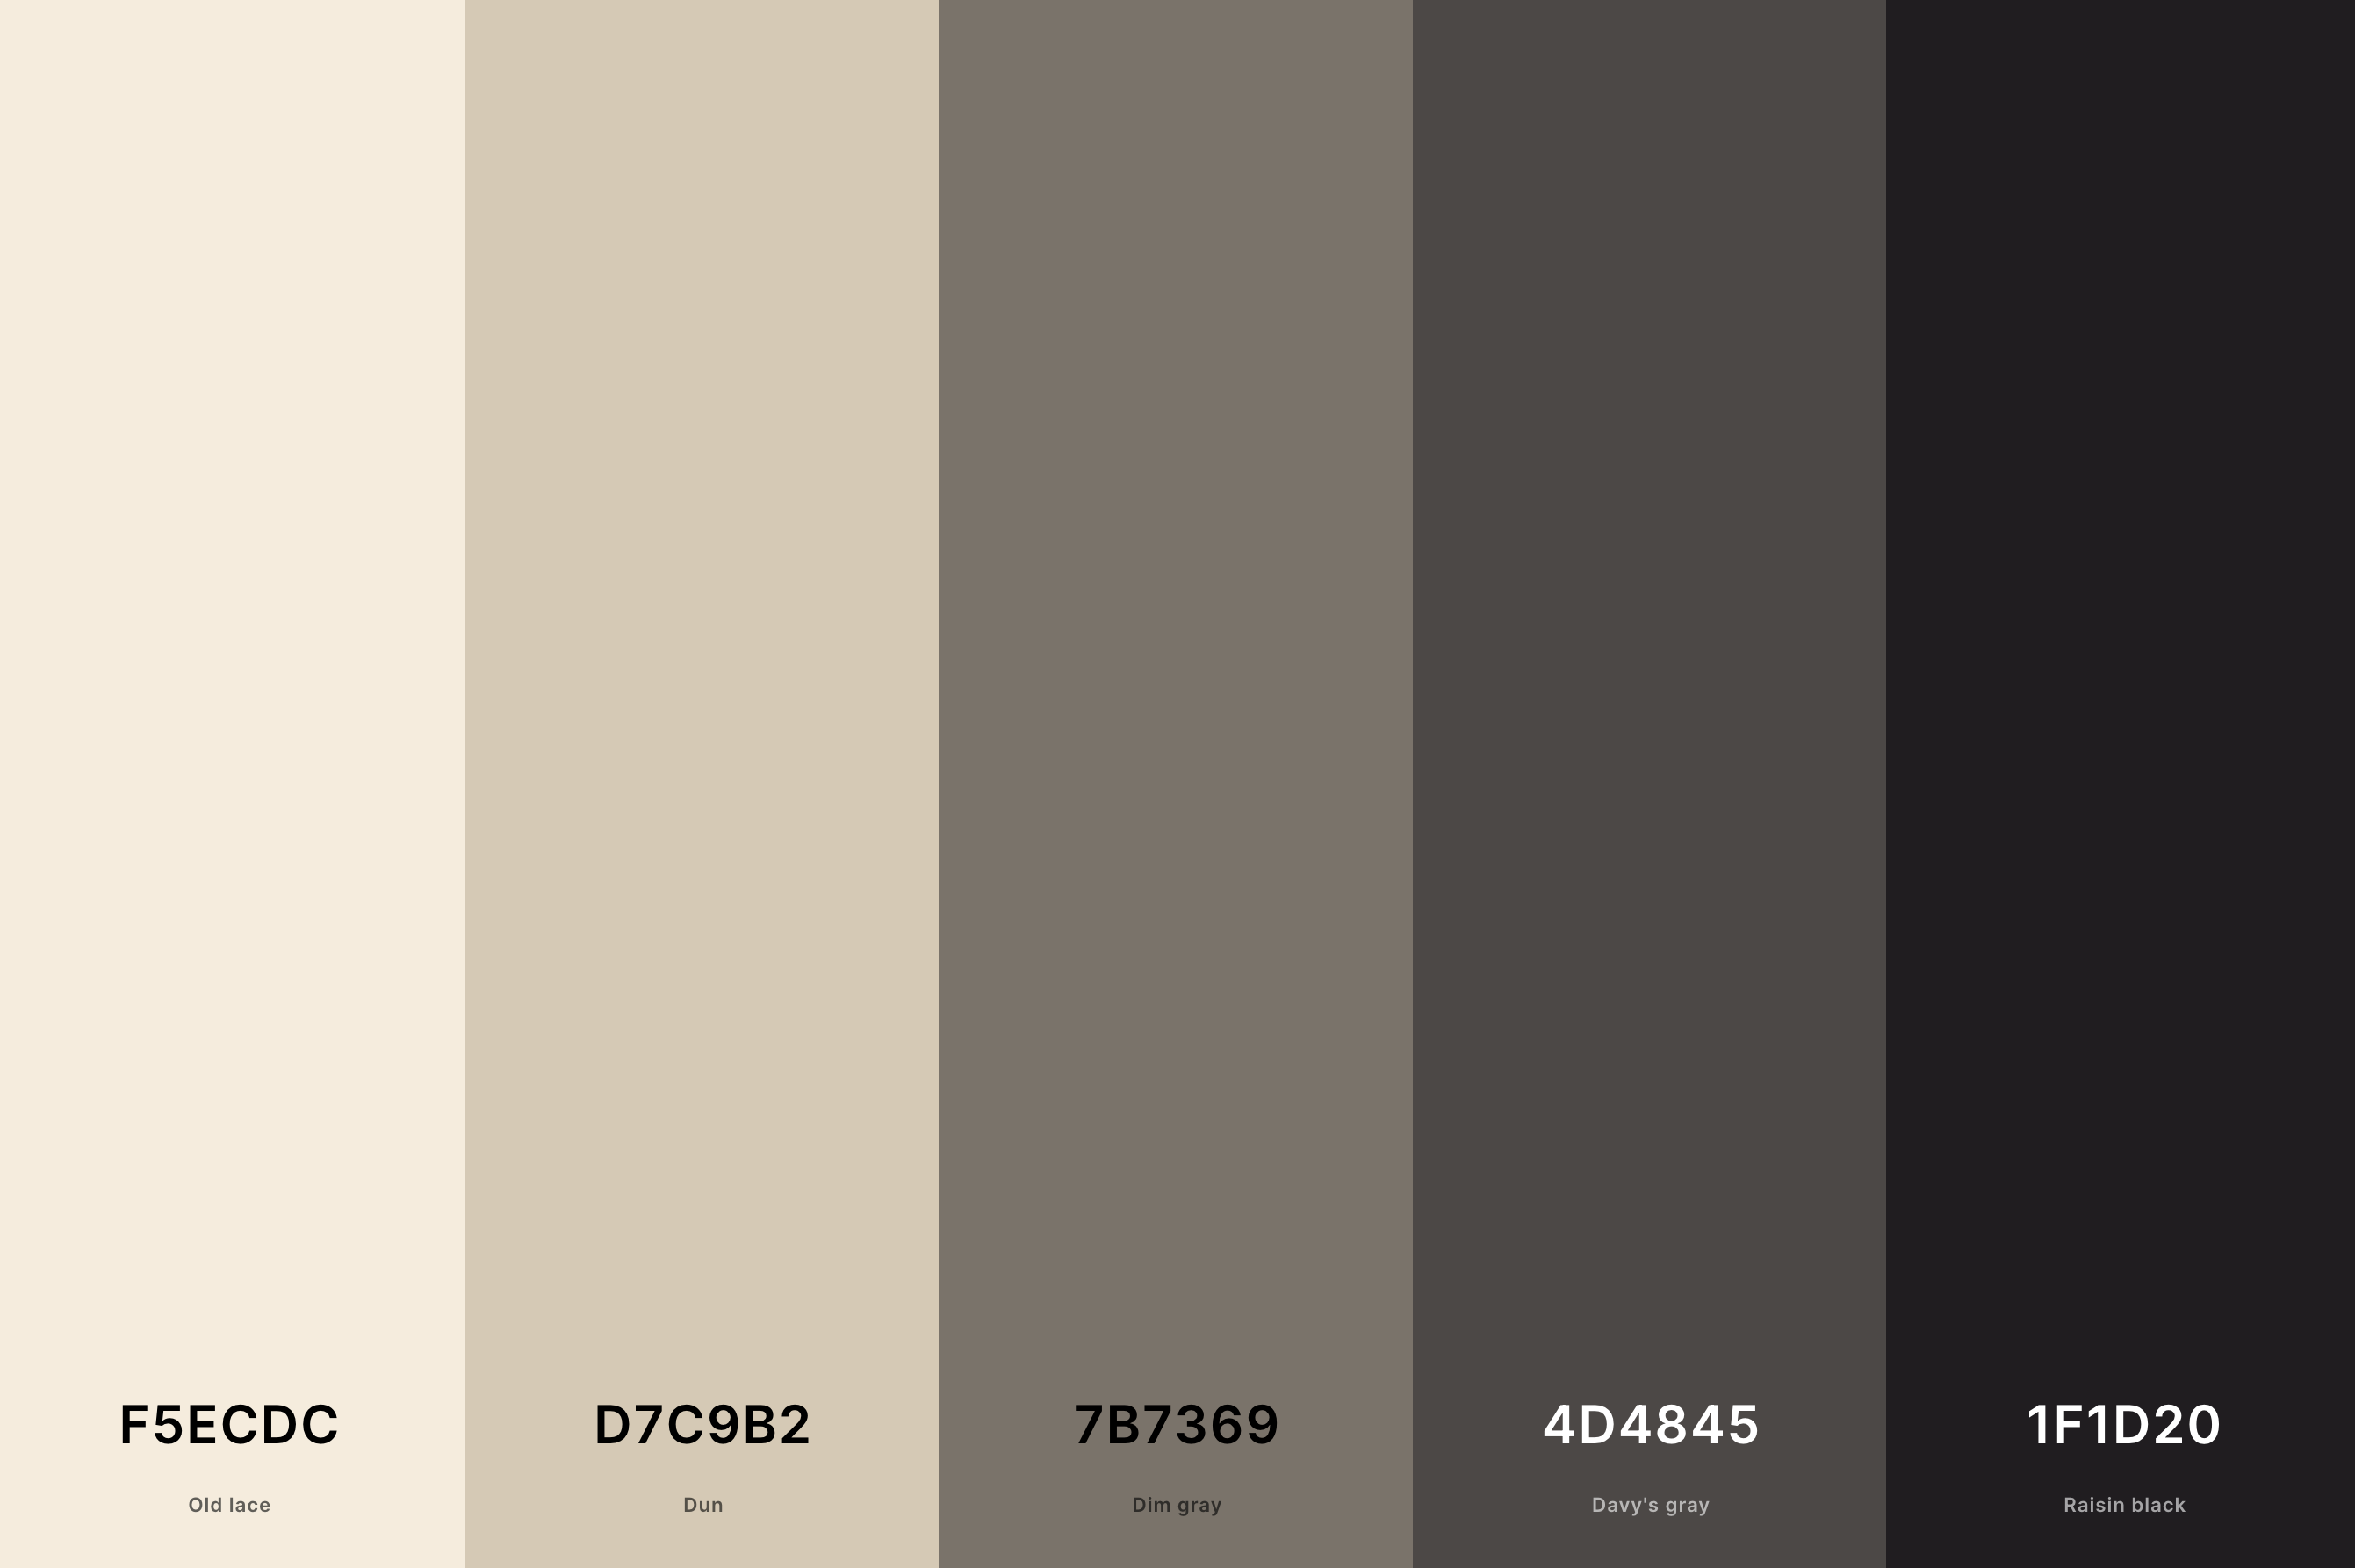 7. Beige And Black Color Palette Color Palette with Old Lace (Hex #F5ECDC) + Dun (Hex #D7C9B2) + Dim Gray (Hex #7B7369) + Davy'S Gray (Hex #4D4845) + Raisin Black (Hex #1F1D20) Color Palette with Hex Codes